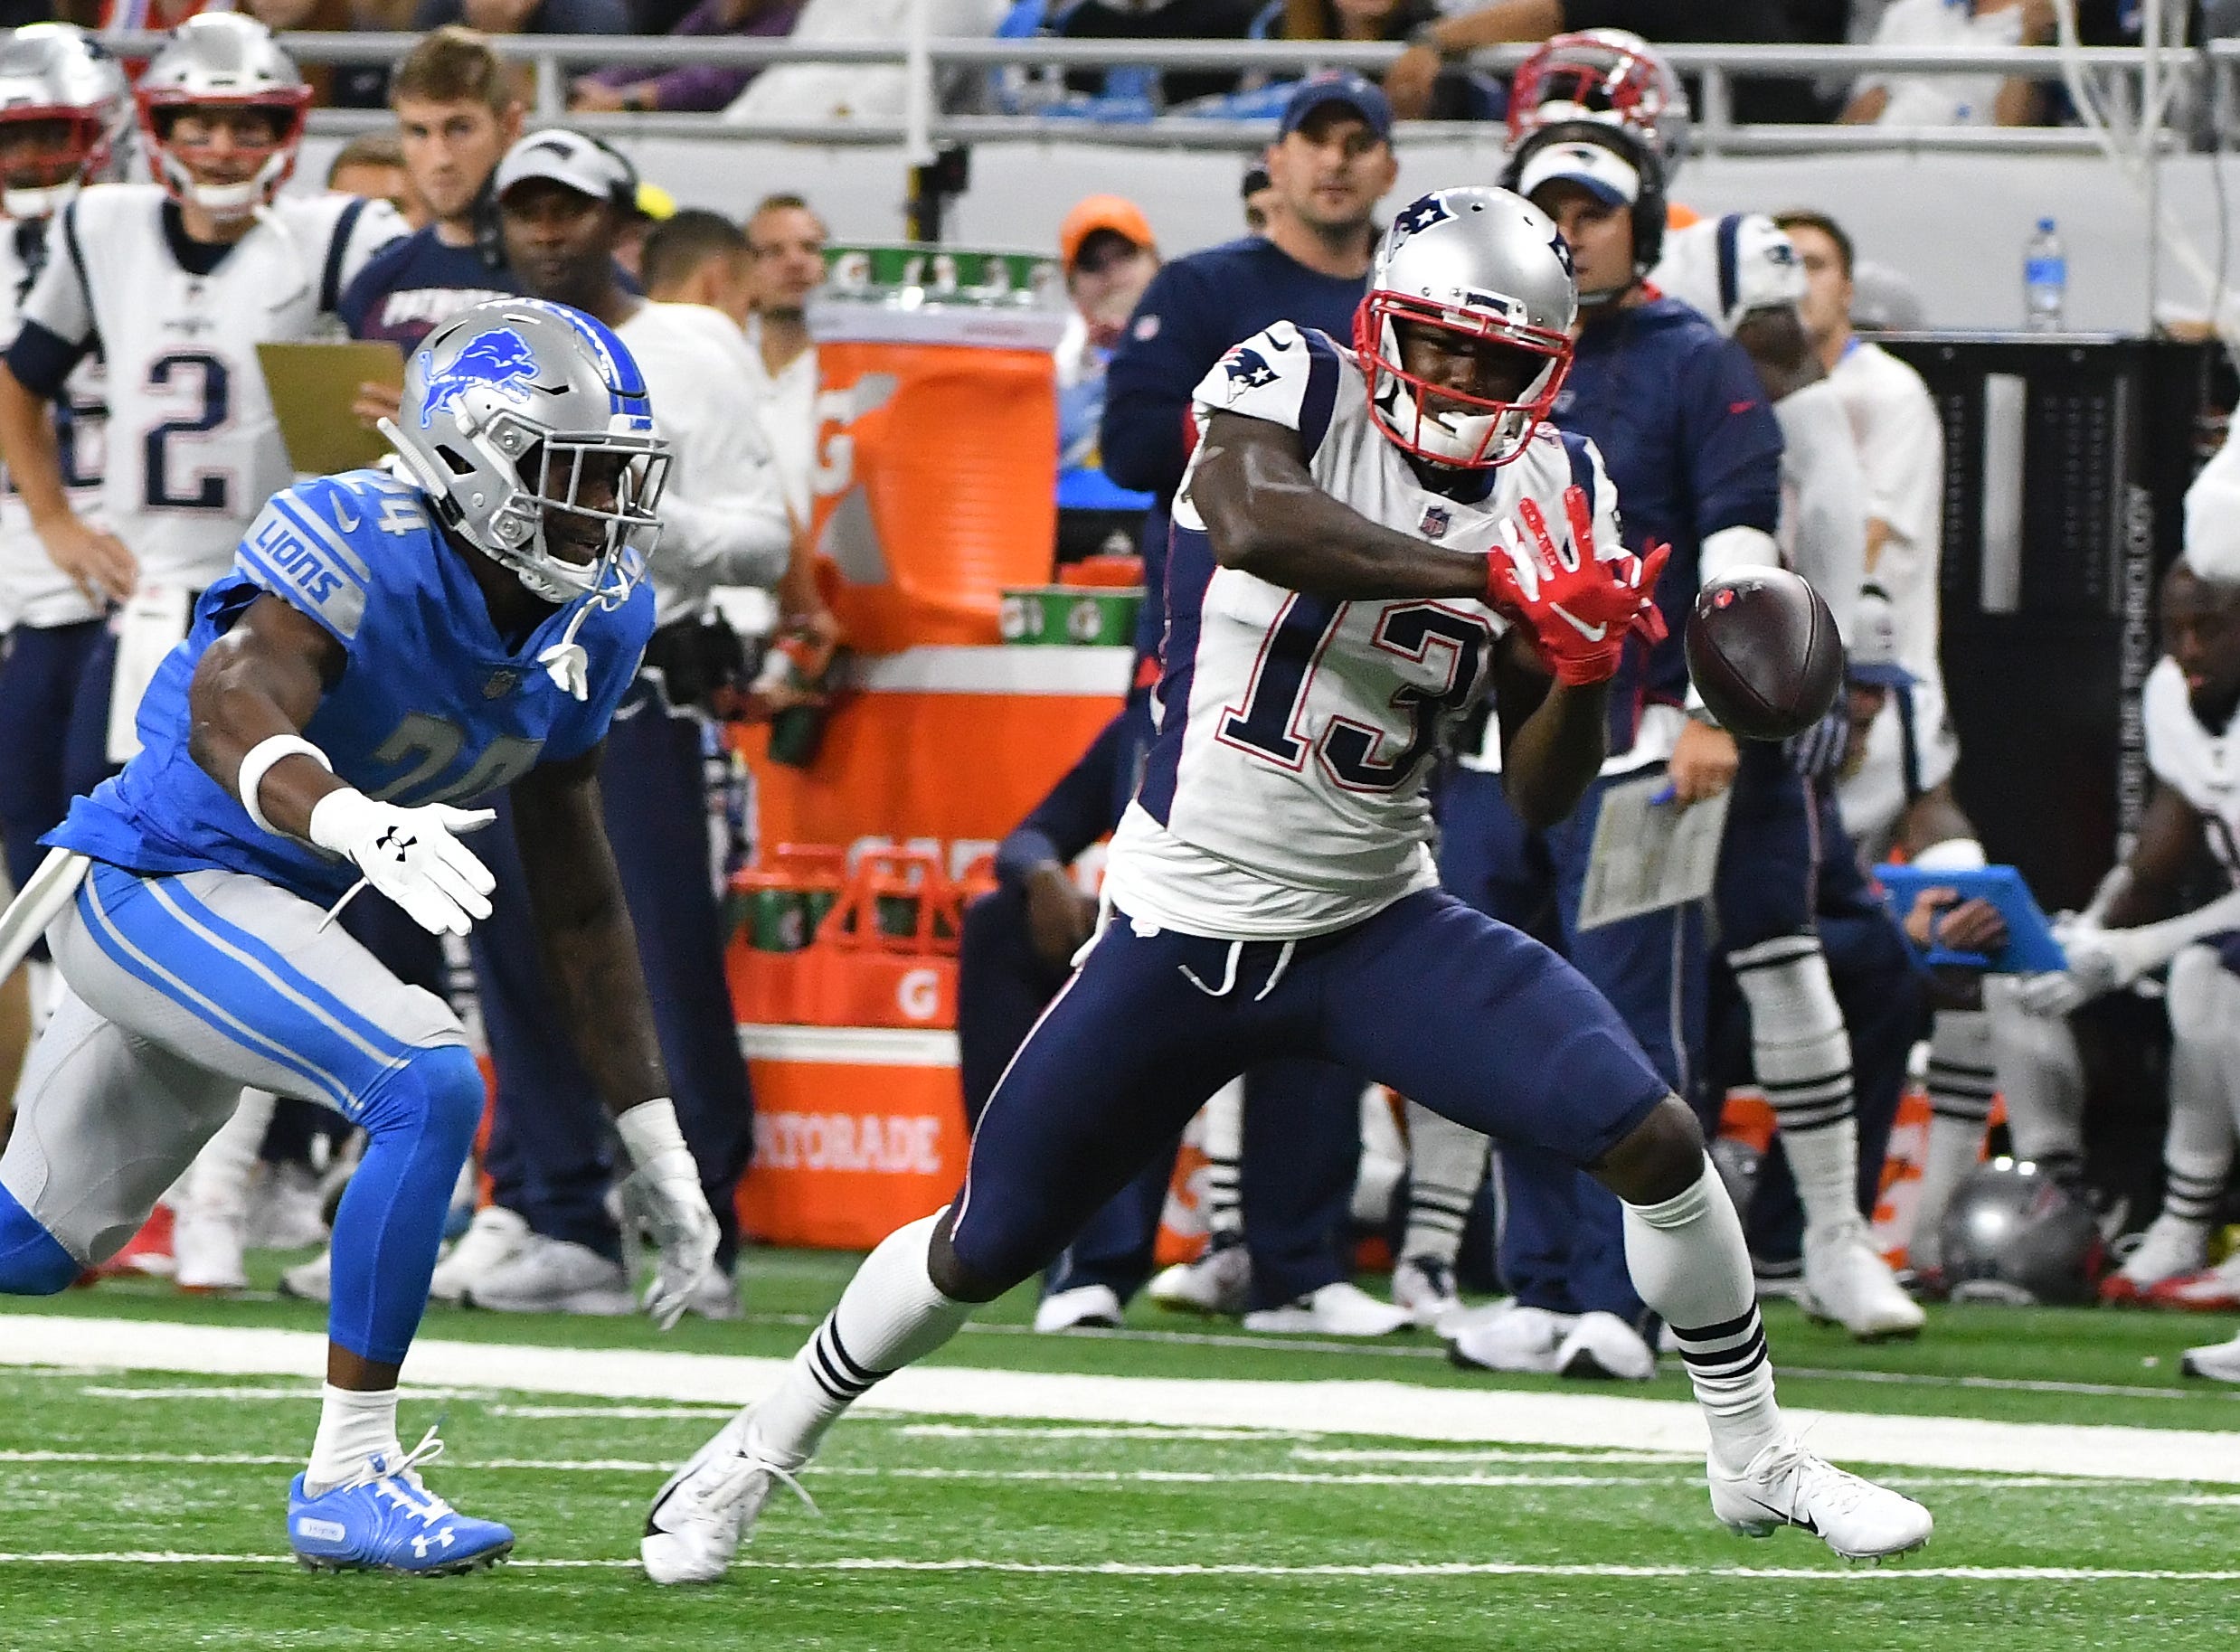 Patriots ' Phillip Dorsett can ' t hang onto a pass that hits his hands with Lions corner back Kevin Lawson defending int he first quarter.